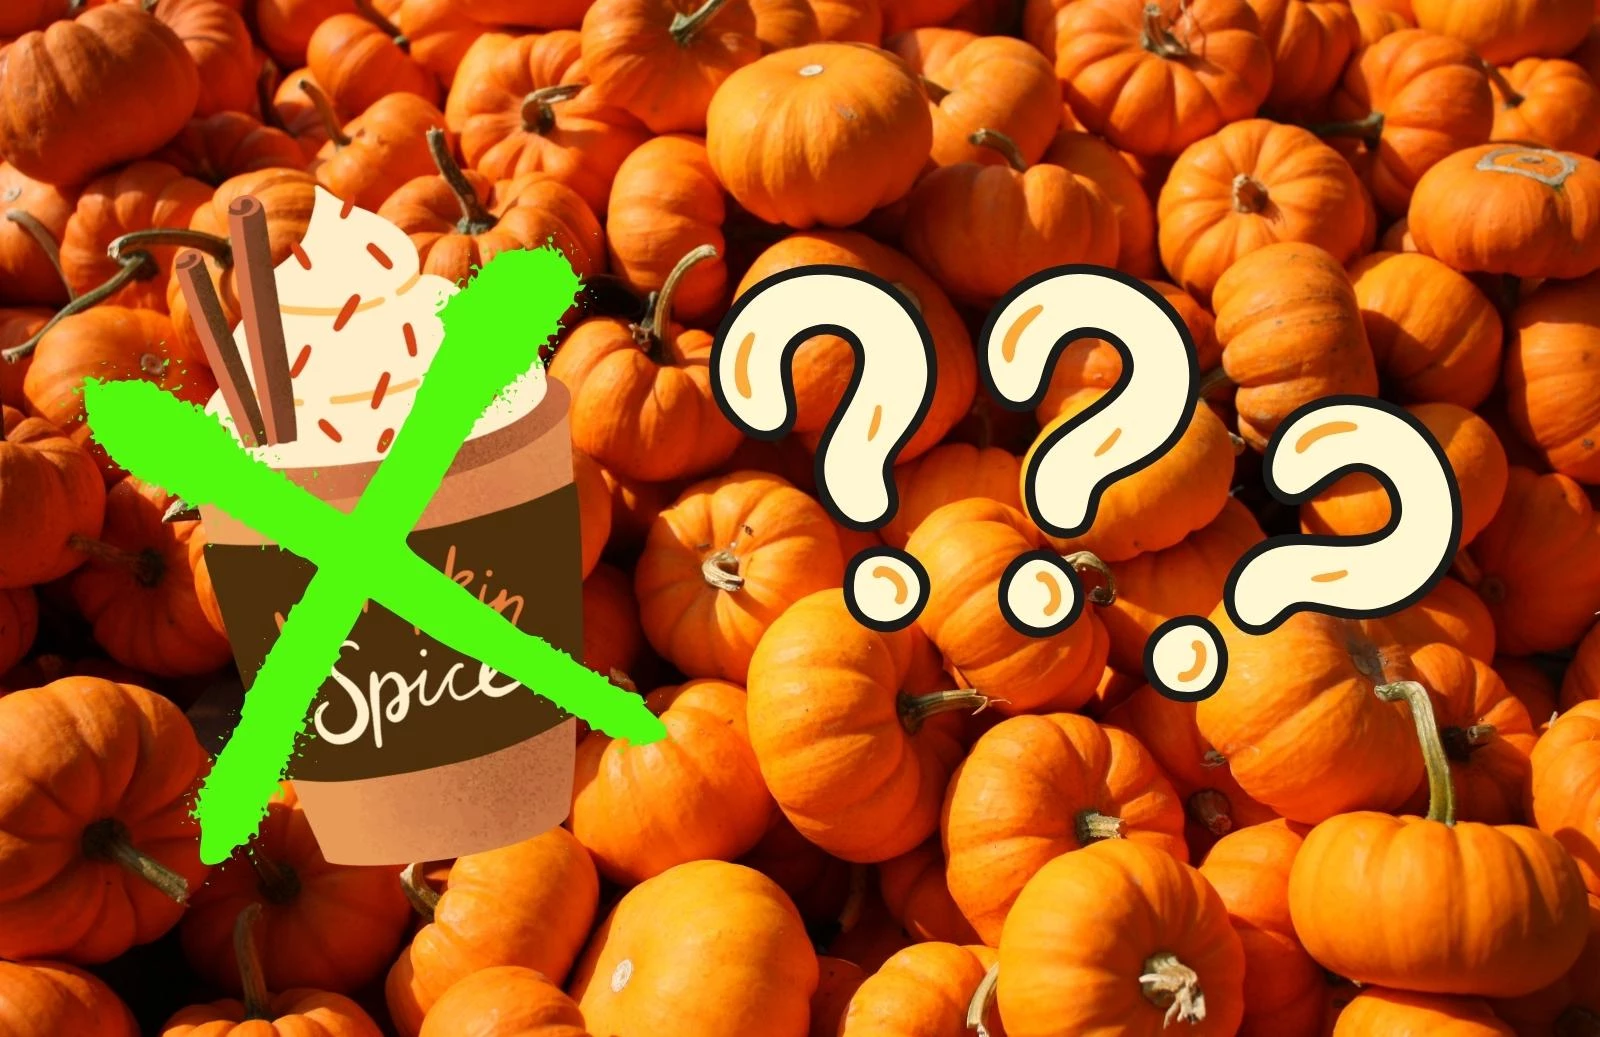 Would You Try Michigan's Unique Favorite Pumpkin Spiced Treat?